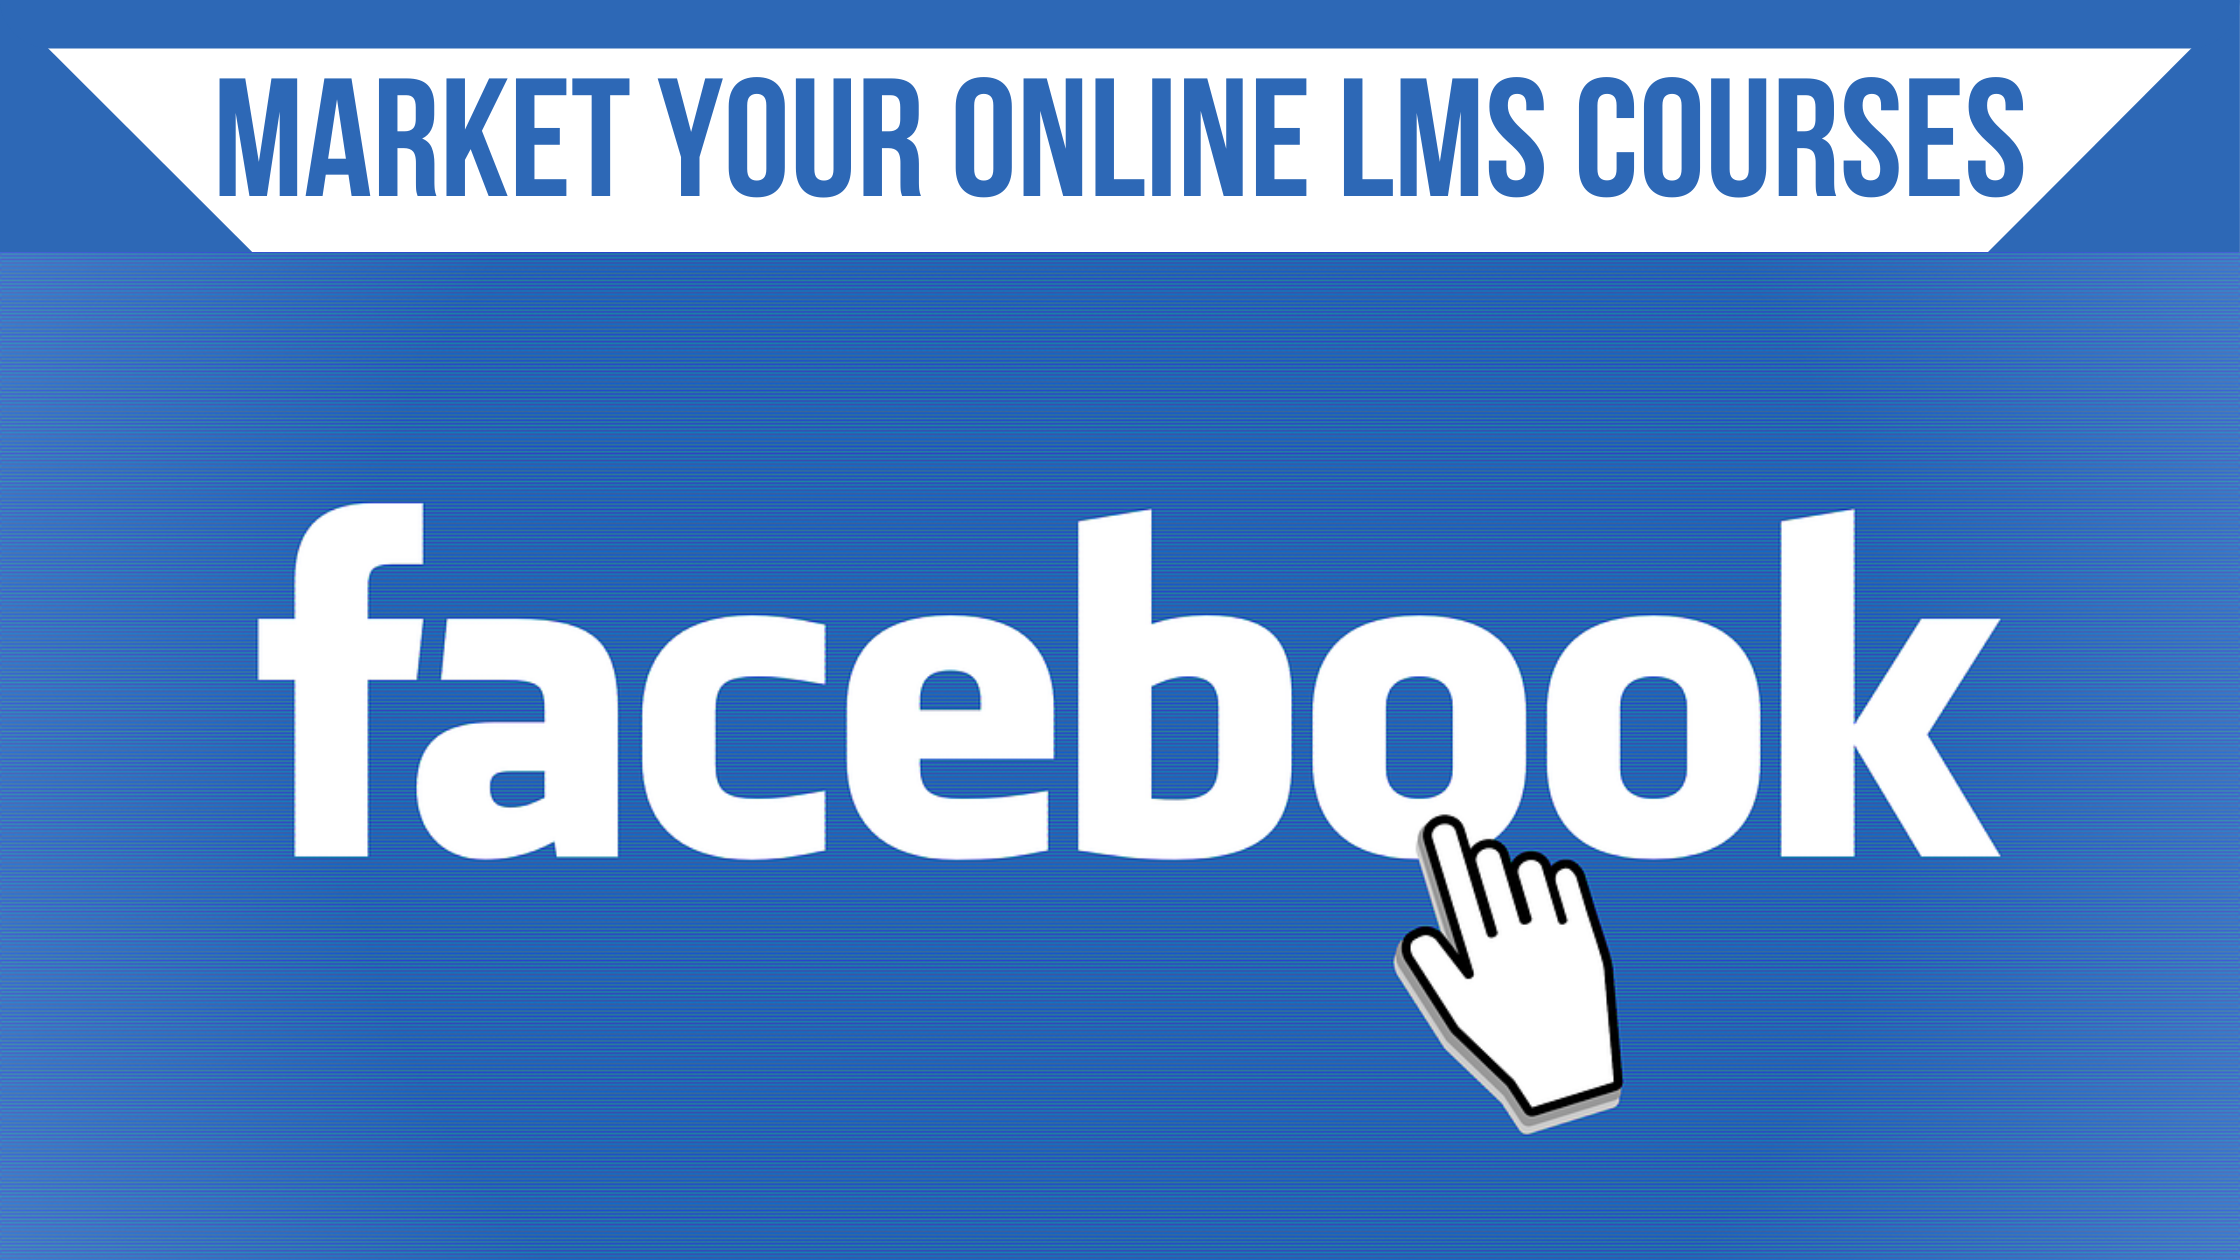 How to use Facebook effectively to market your online LMS courses